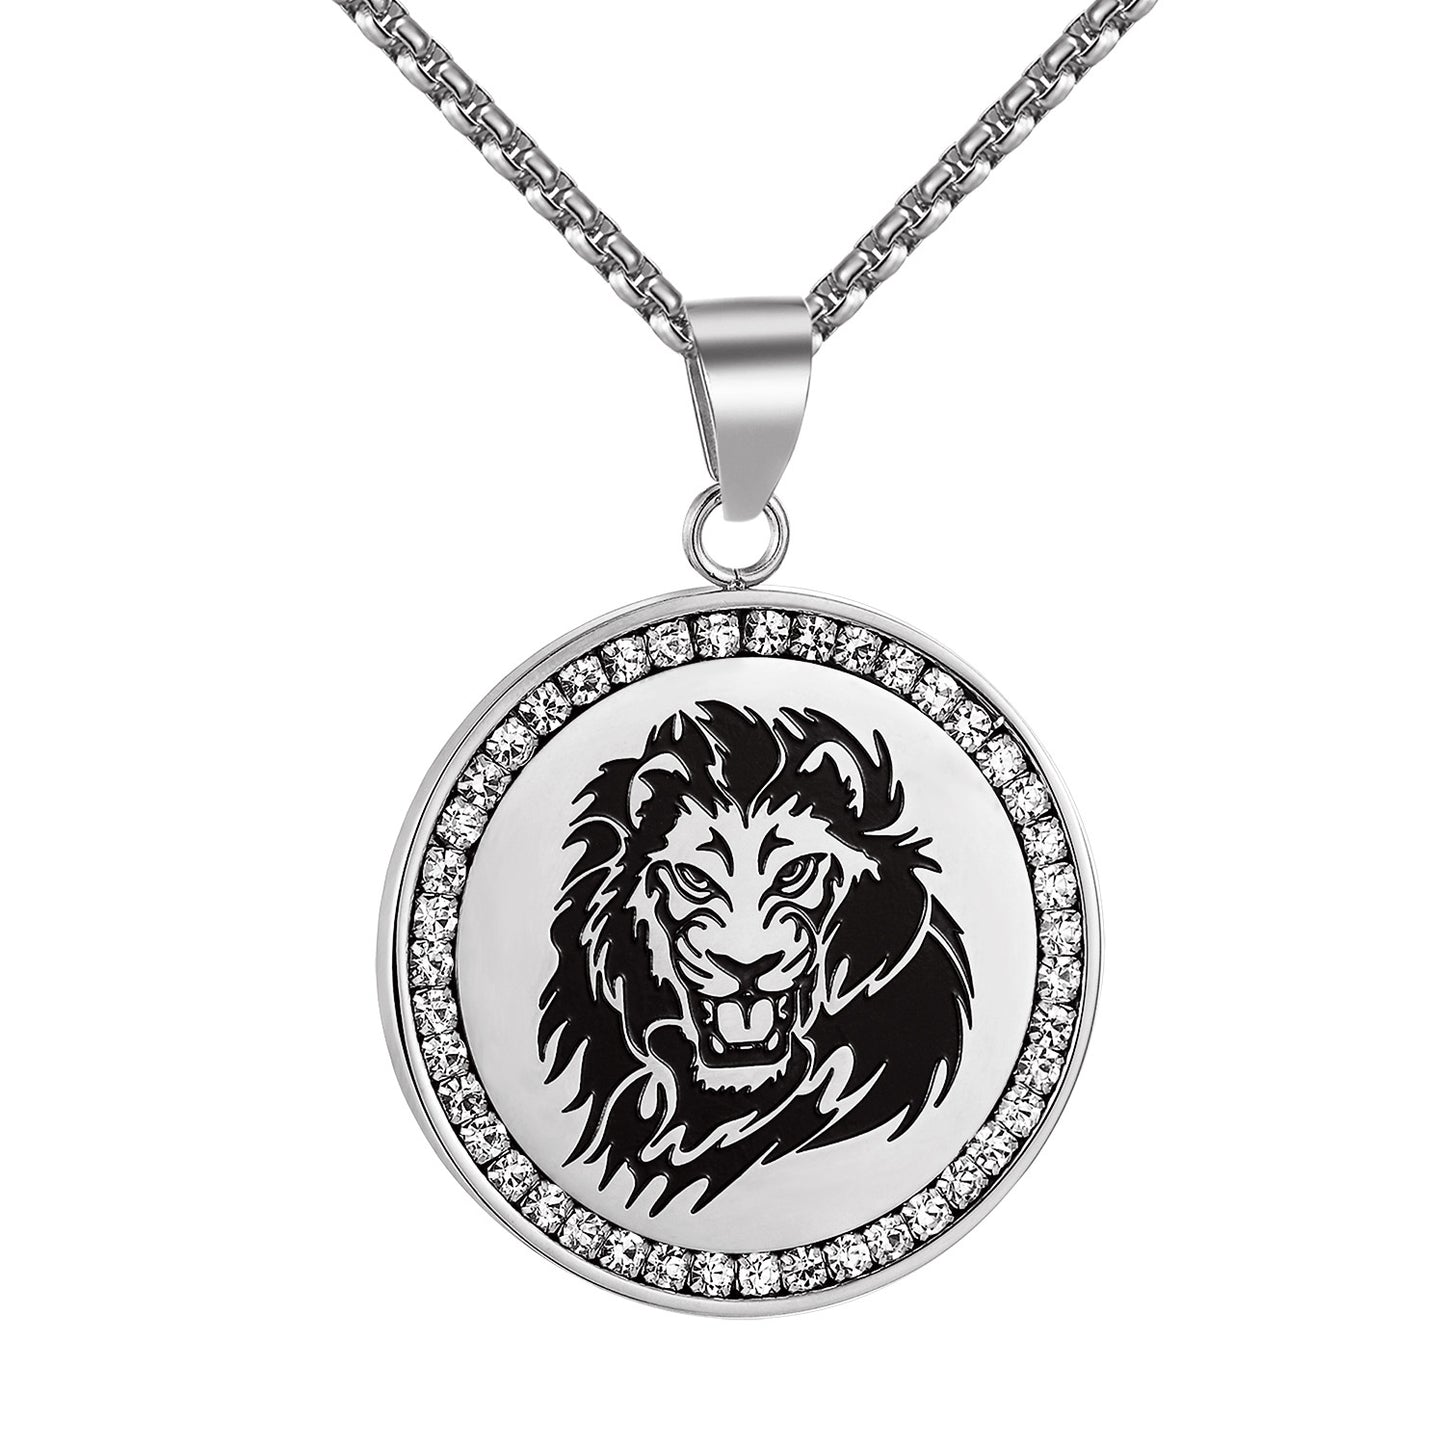 Stainless Steel Lion Coin Design Pendant Simulated Diamonds Round Charm Chain